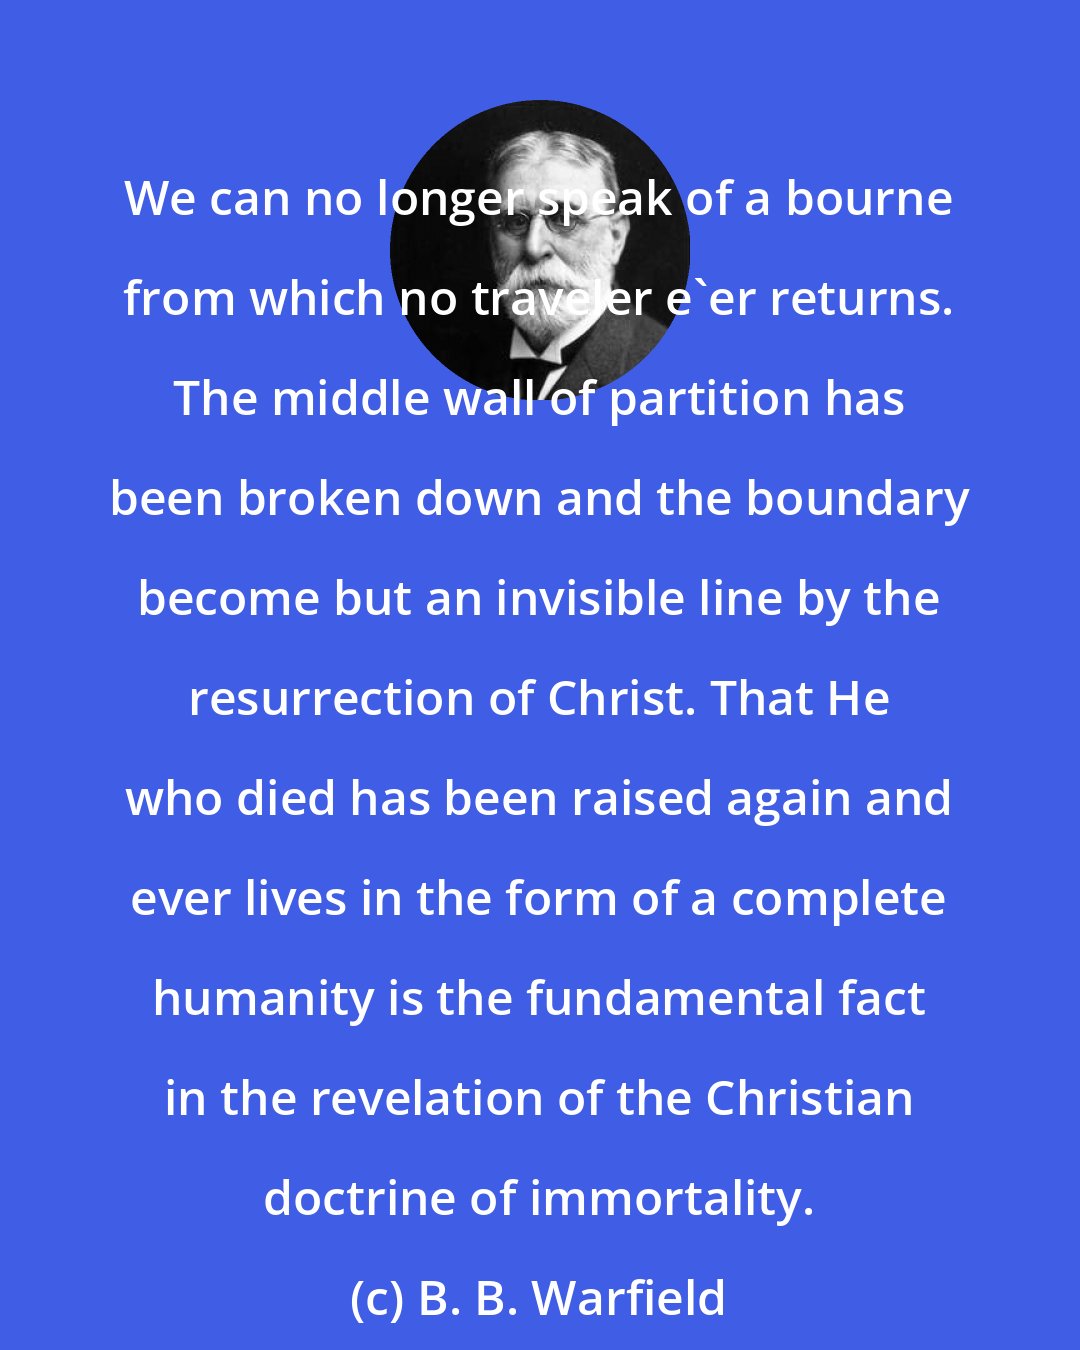 B. B. Warfield: We can no longer speak of a bourne from which no traveler e'er returns. The middle wall of partition has been broken down and the boundary become but an invisible line by the resurrection of Christ. That He who died has been raised again and ever lives in the form of a complete humanity is the fundamental fact in the revelation of the Christian doctrine of immortality.